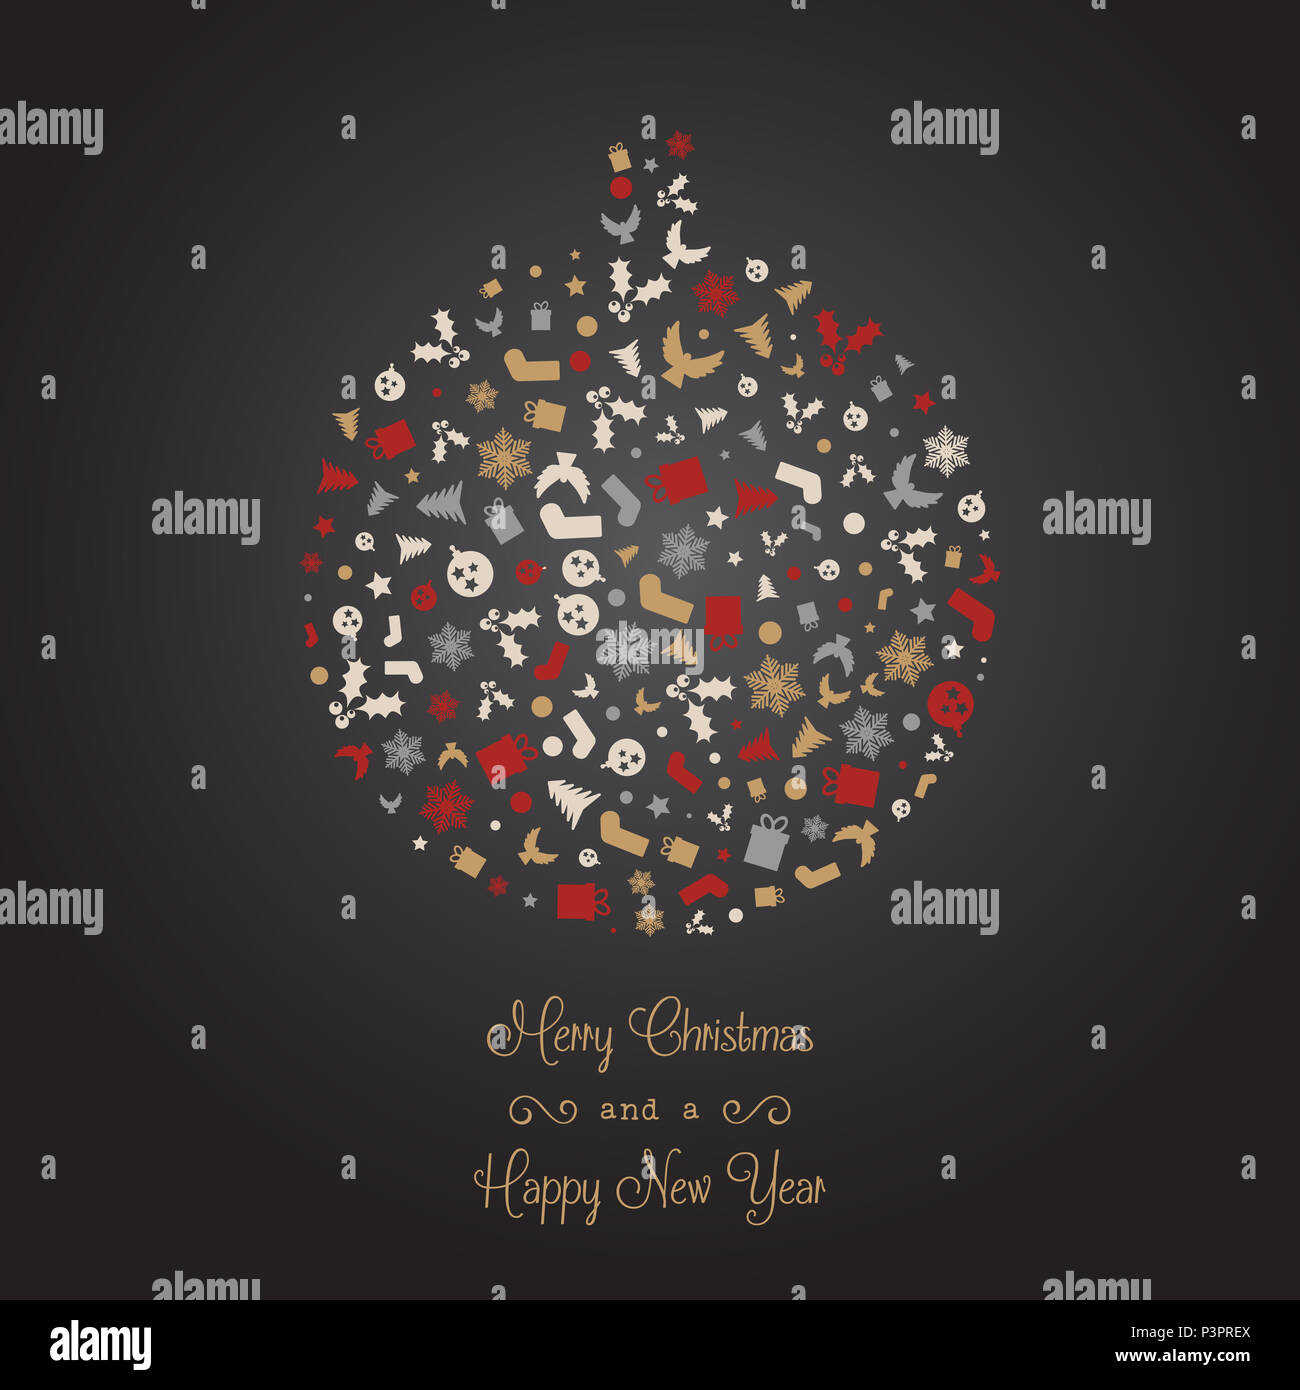 Decorative Christmas background with icons in bauble shape Stock Photo